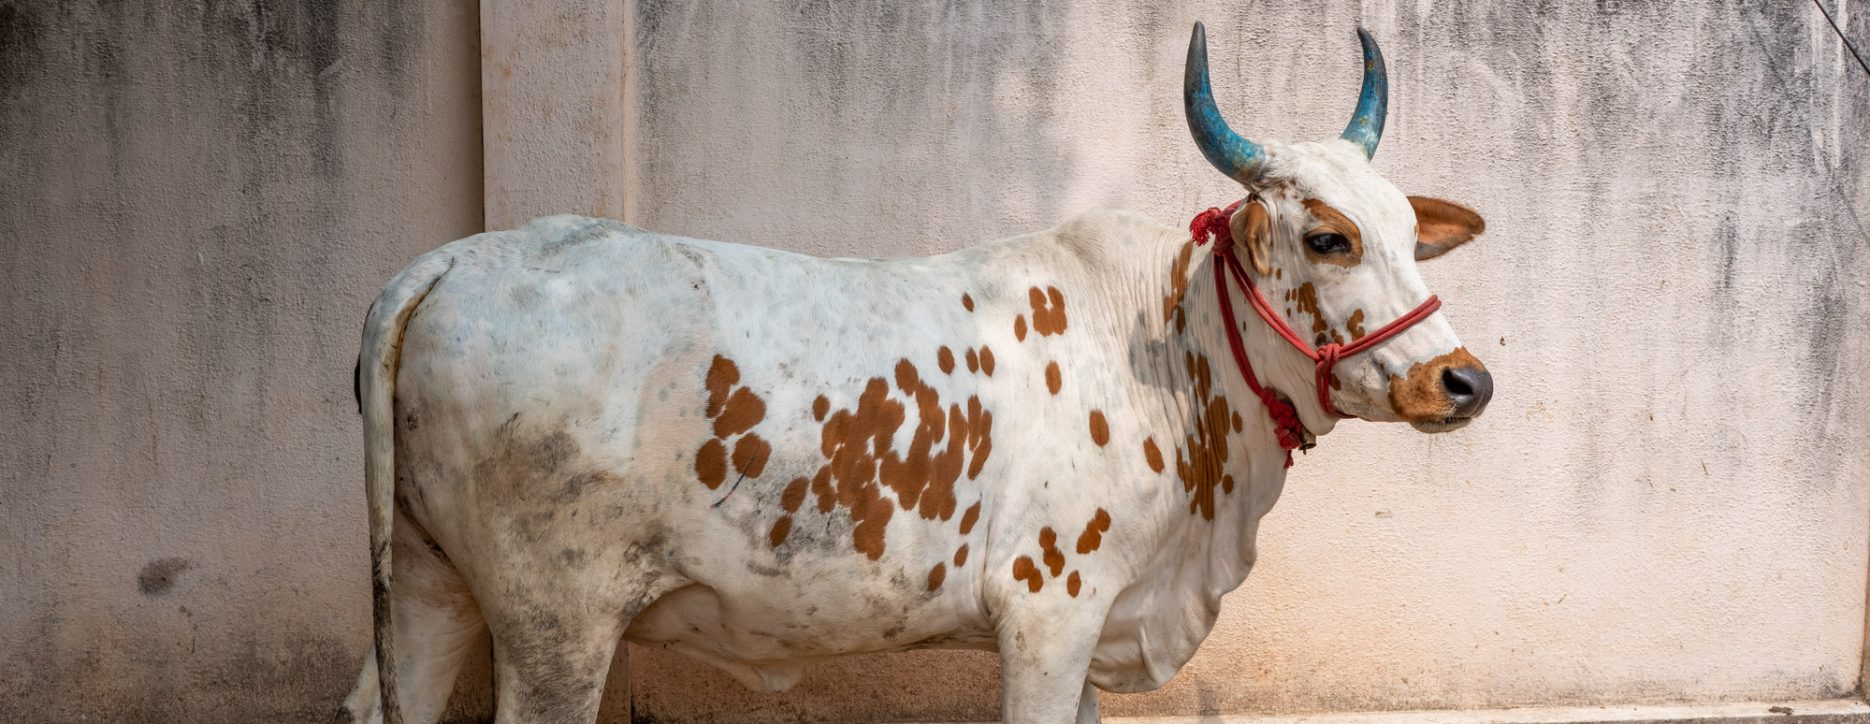 Blue horn cow in India